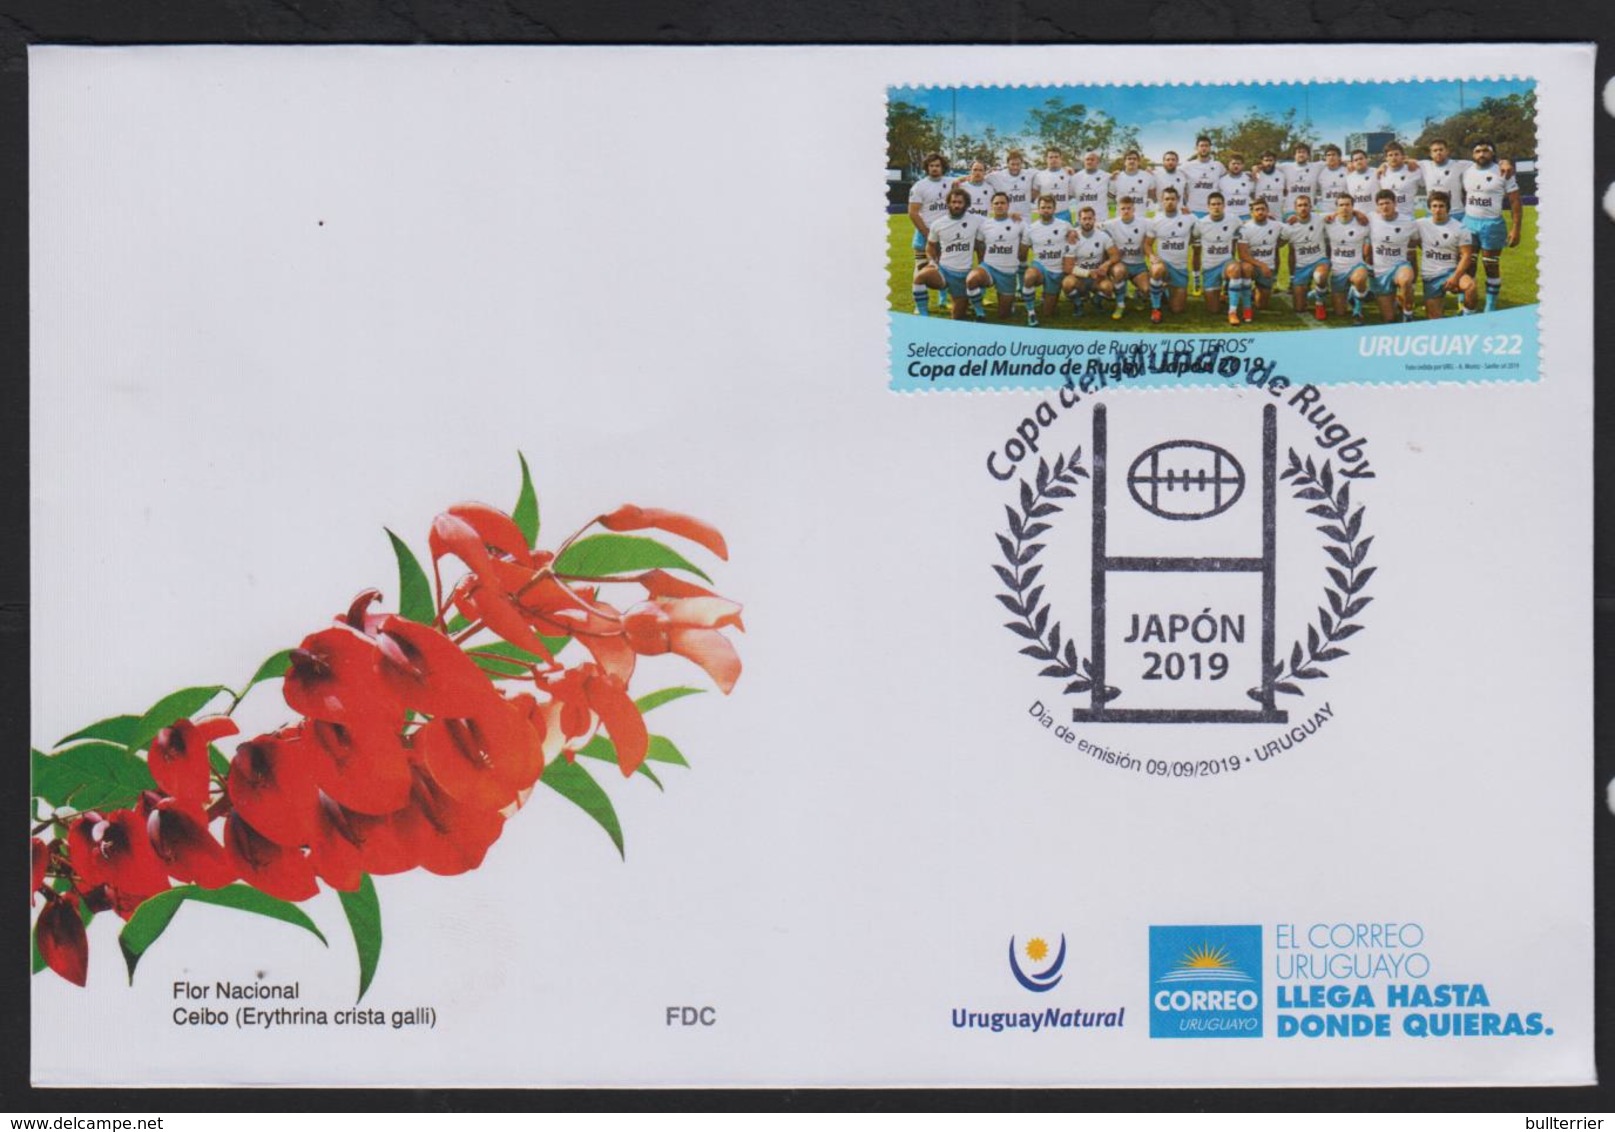 RUGBY - URUGUAY - 2019 - RUGBY WORLD CUP  ON ILLUSTRATED FIRST DAY COVER - Rugby